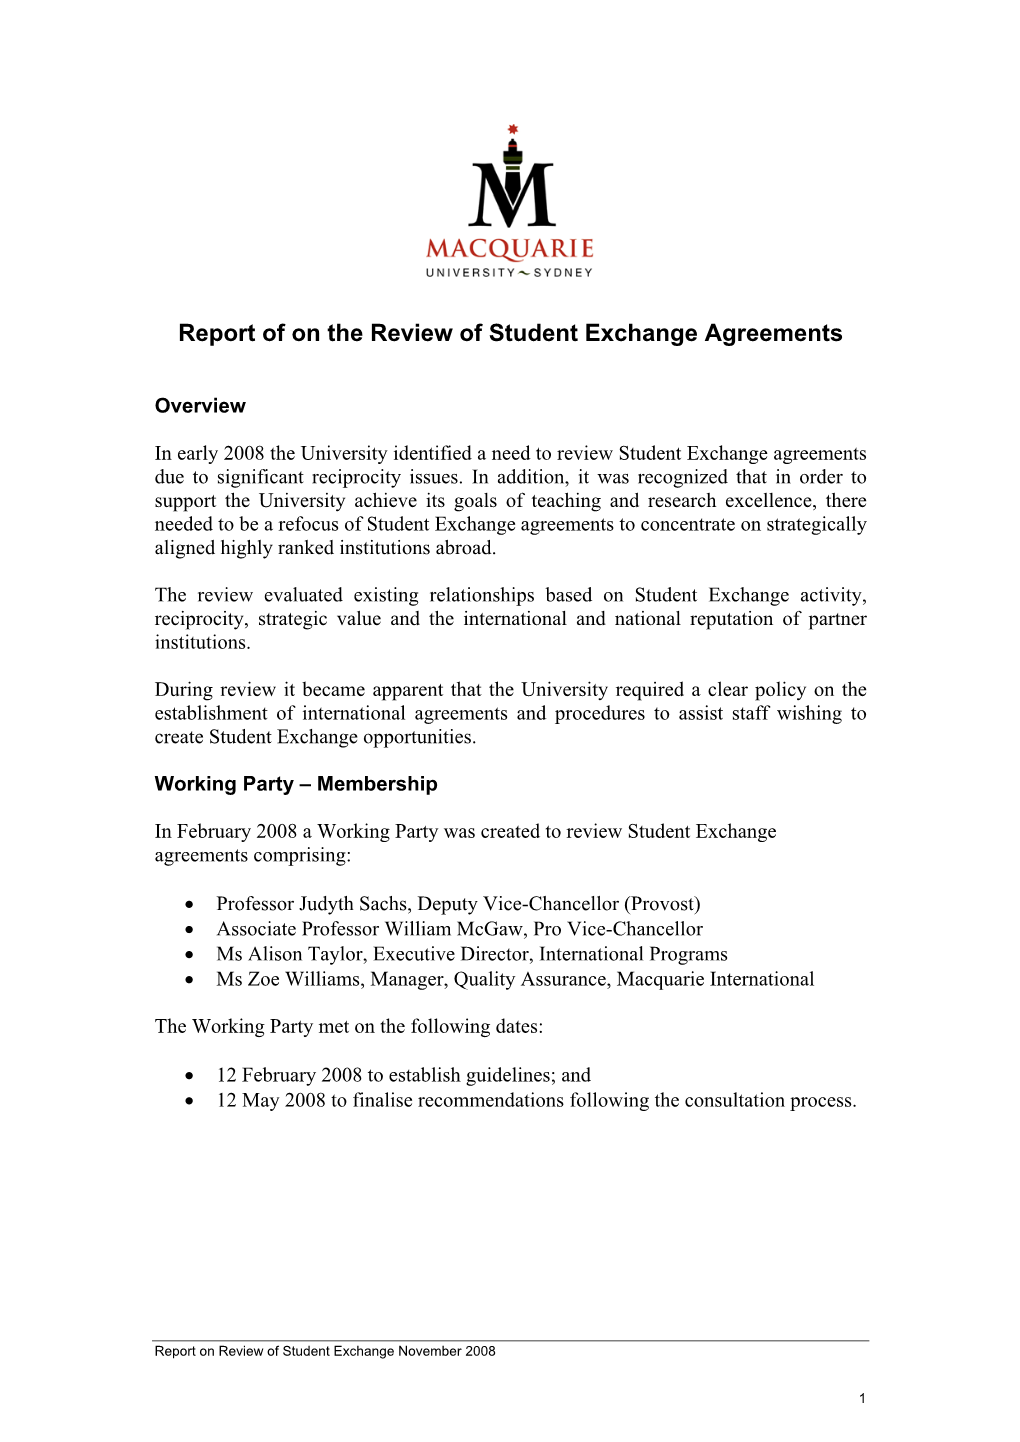 Report on the Review of Student Exchange Agreements